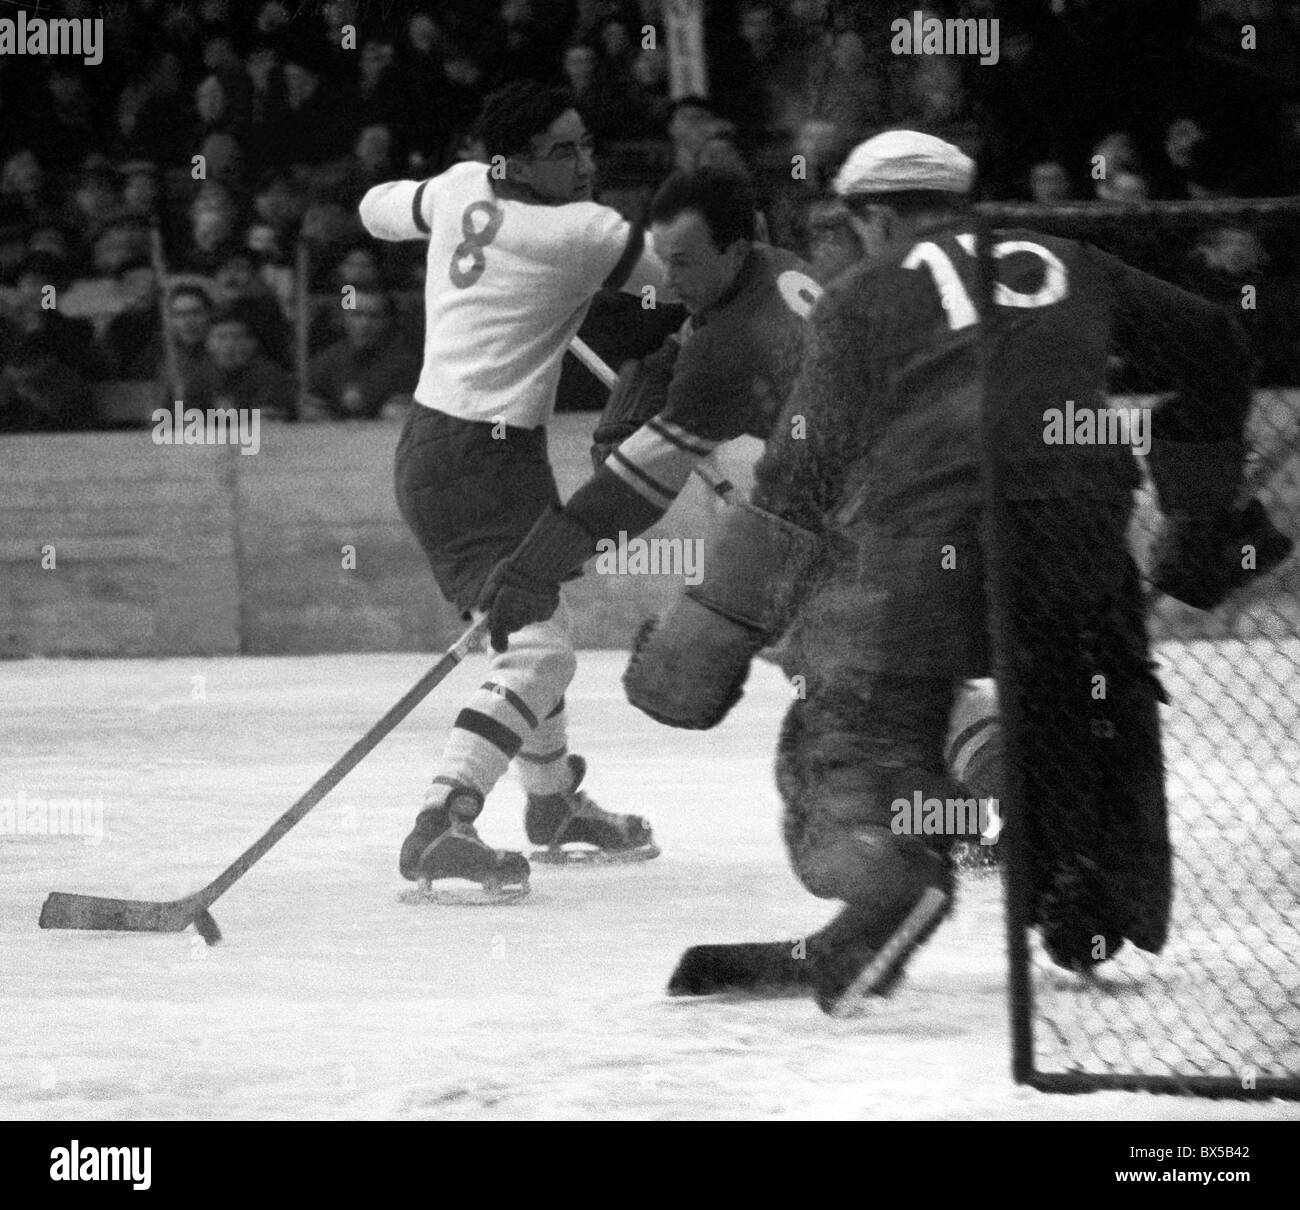 Action from Group B play at the 1961 World Ice Hockey championship match  between Great Britain and Poland at the Vernets rink, in Geneva,  Switzerland Stock Photo - Alamy